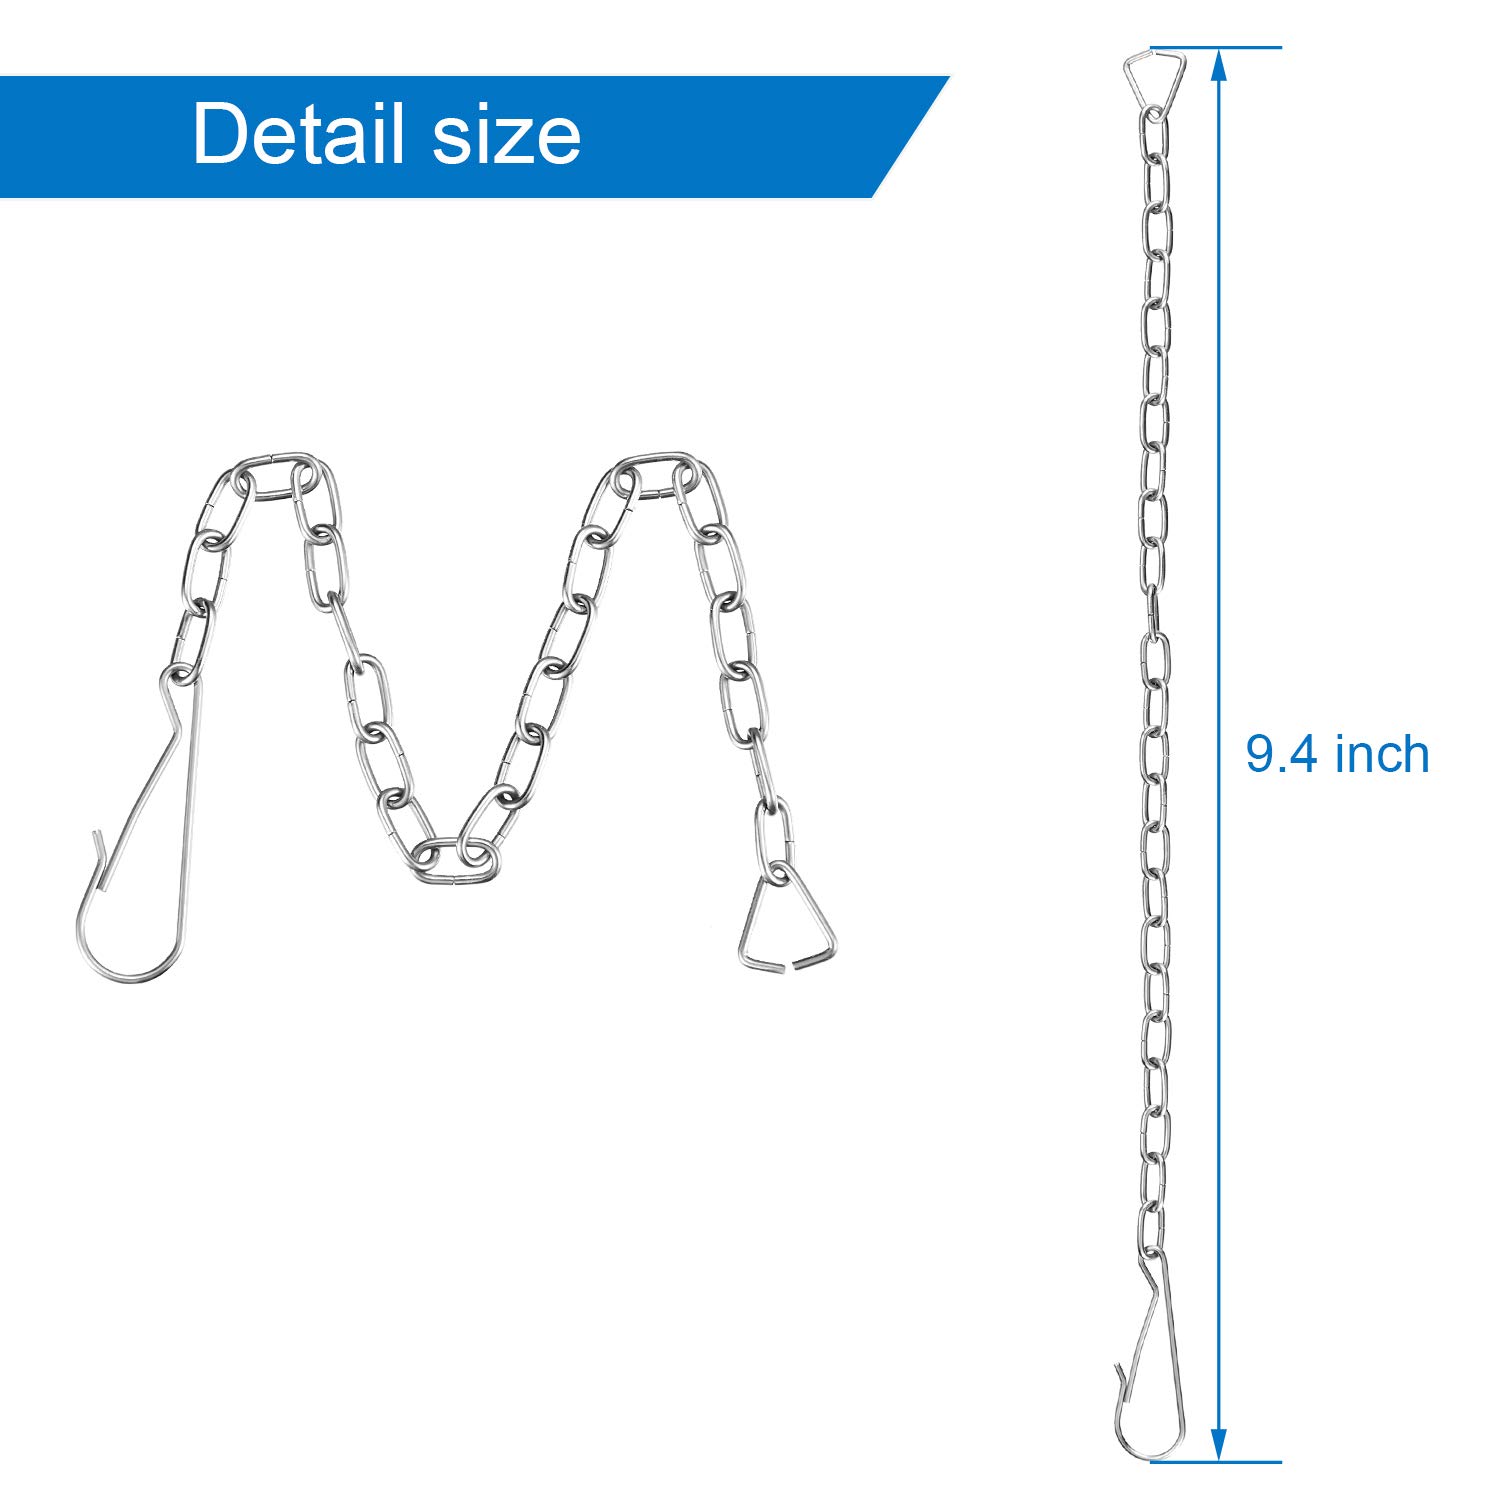 Toilet Handle Chain Stainless Steel Toilet Flapper Lift Chain Replacement Fits Most Toilet Flappers (3)